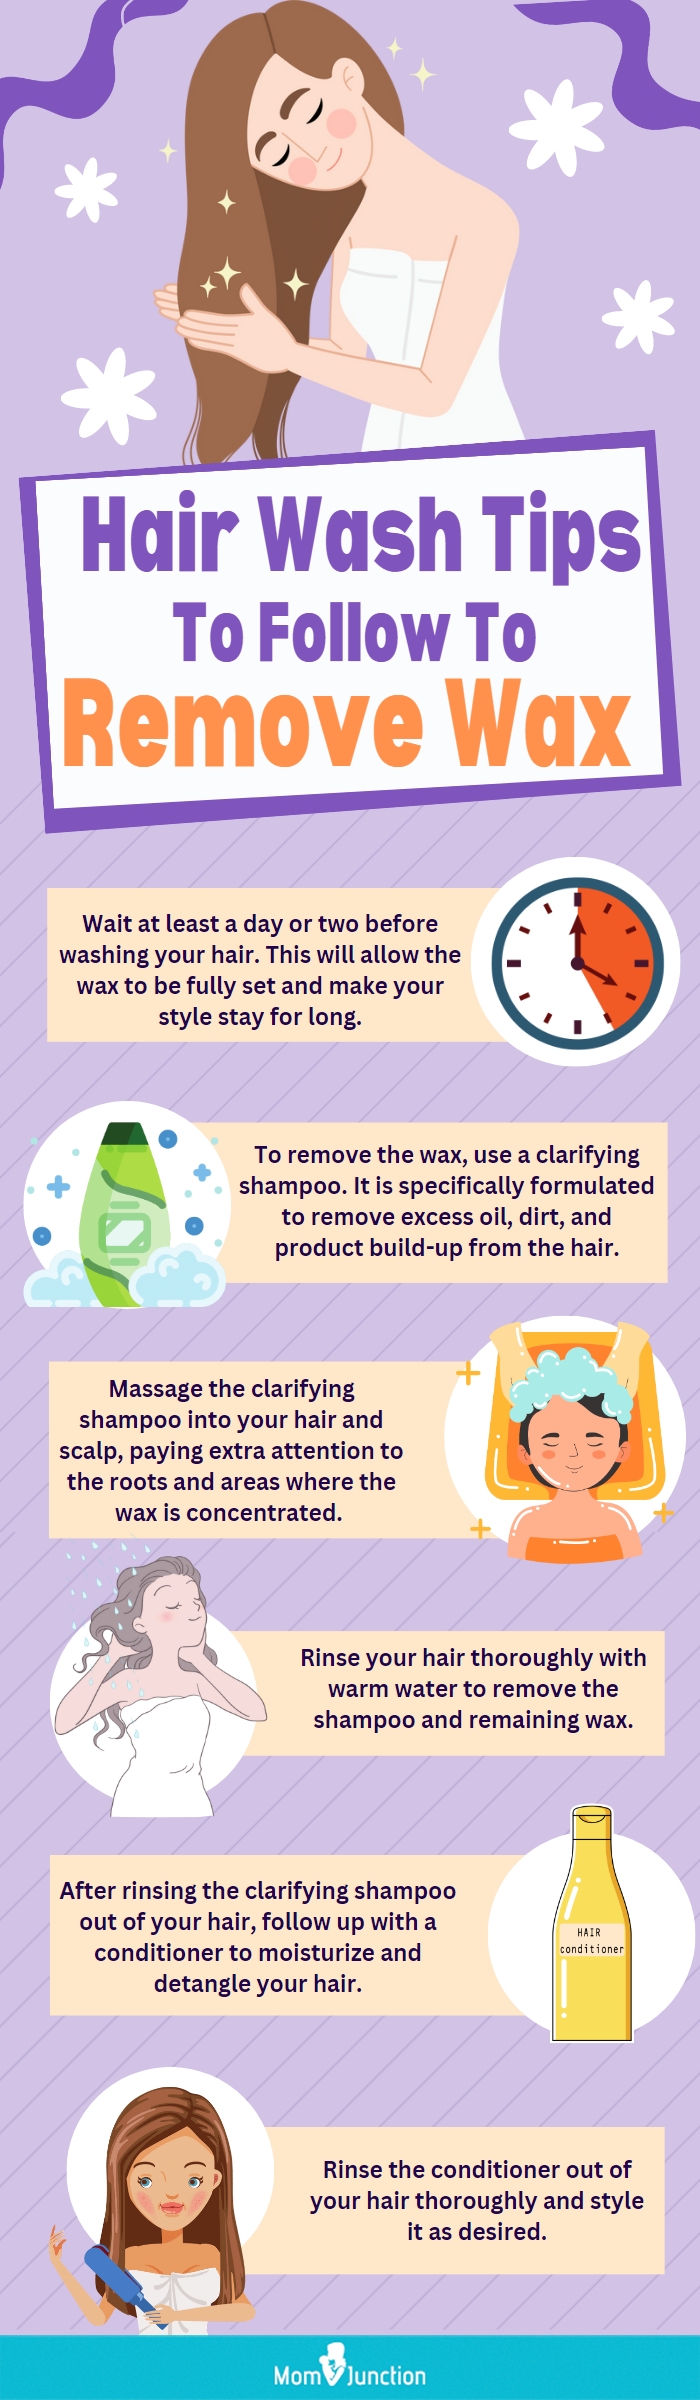 Hair Wash Tips To Follow To Remove Wax Row 28 Content Team 